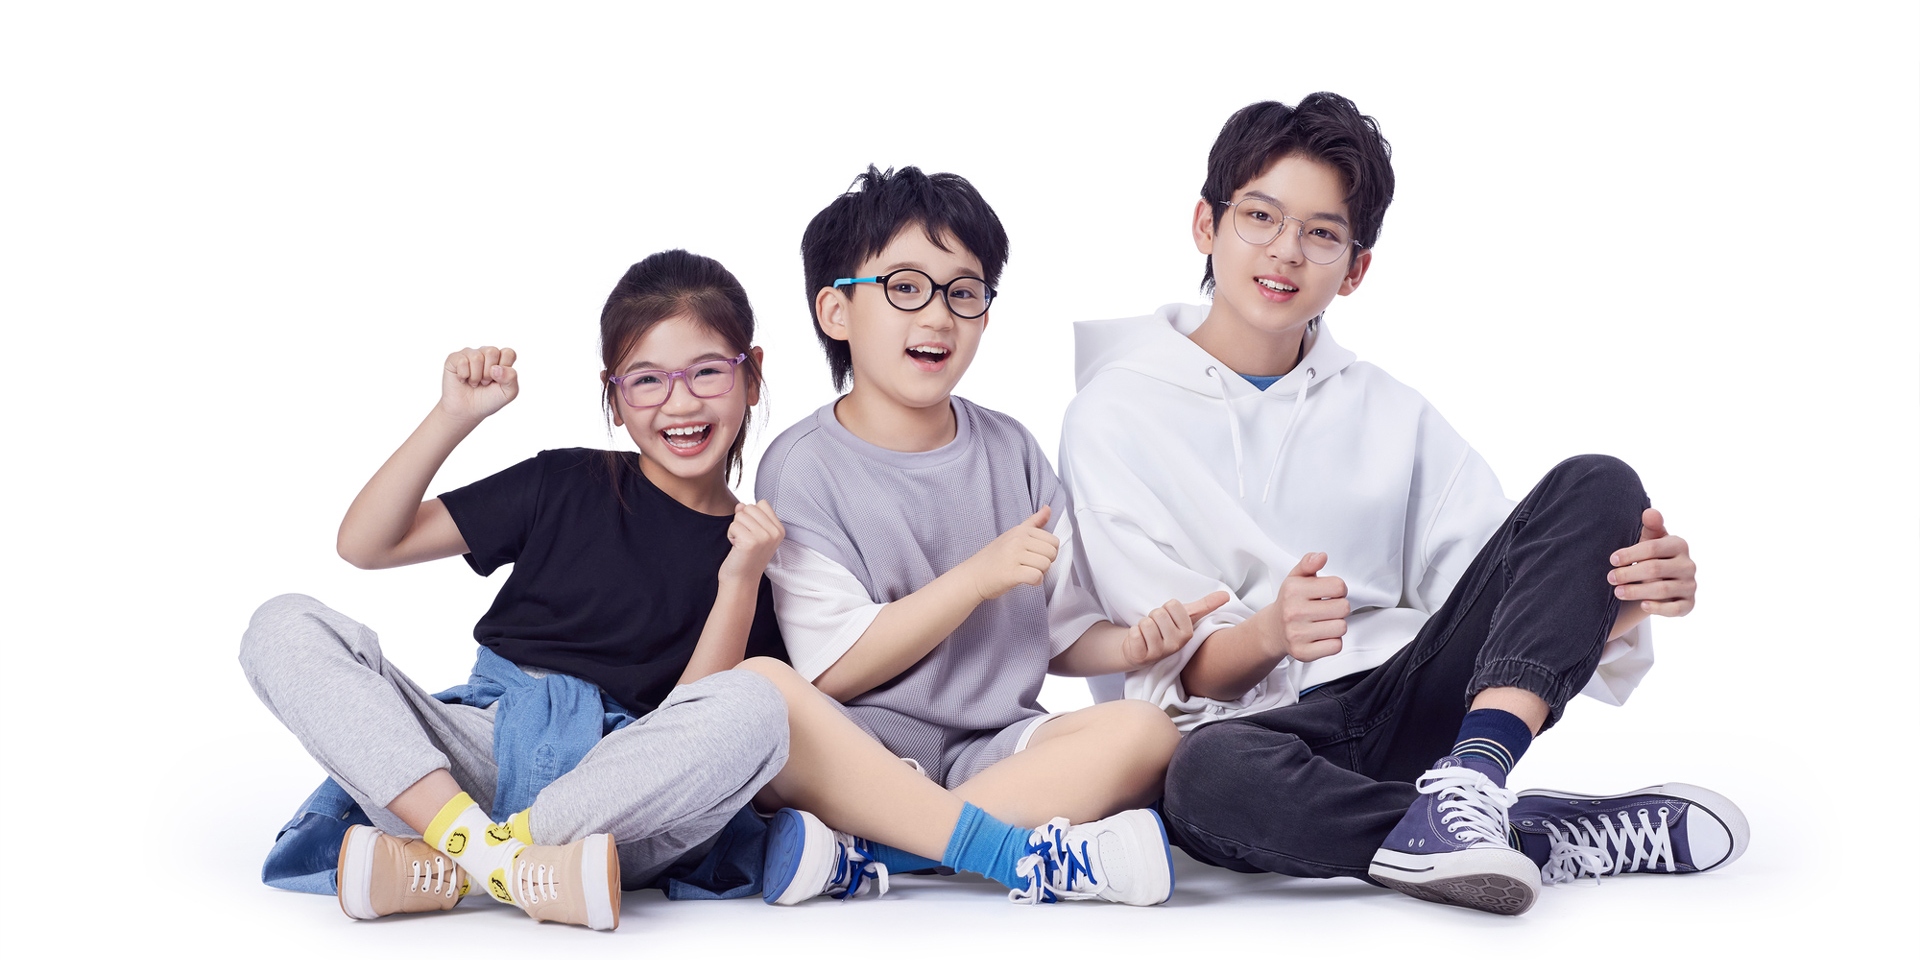 A teenager and two younger children sitting on the floor wearing ZEISS Myopia lenses